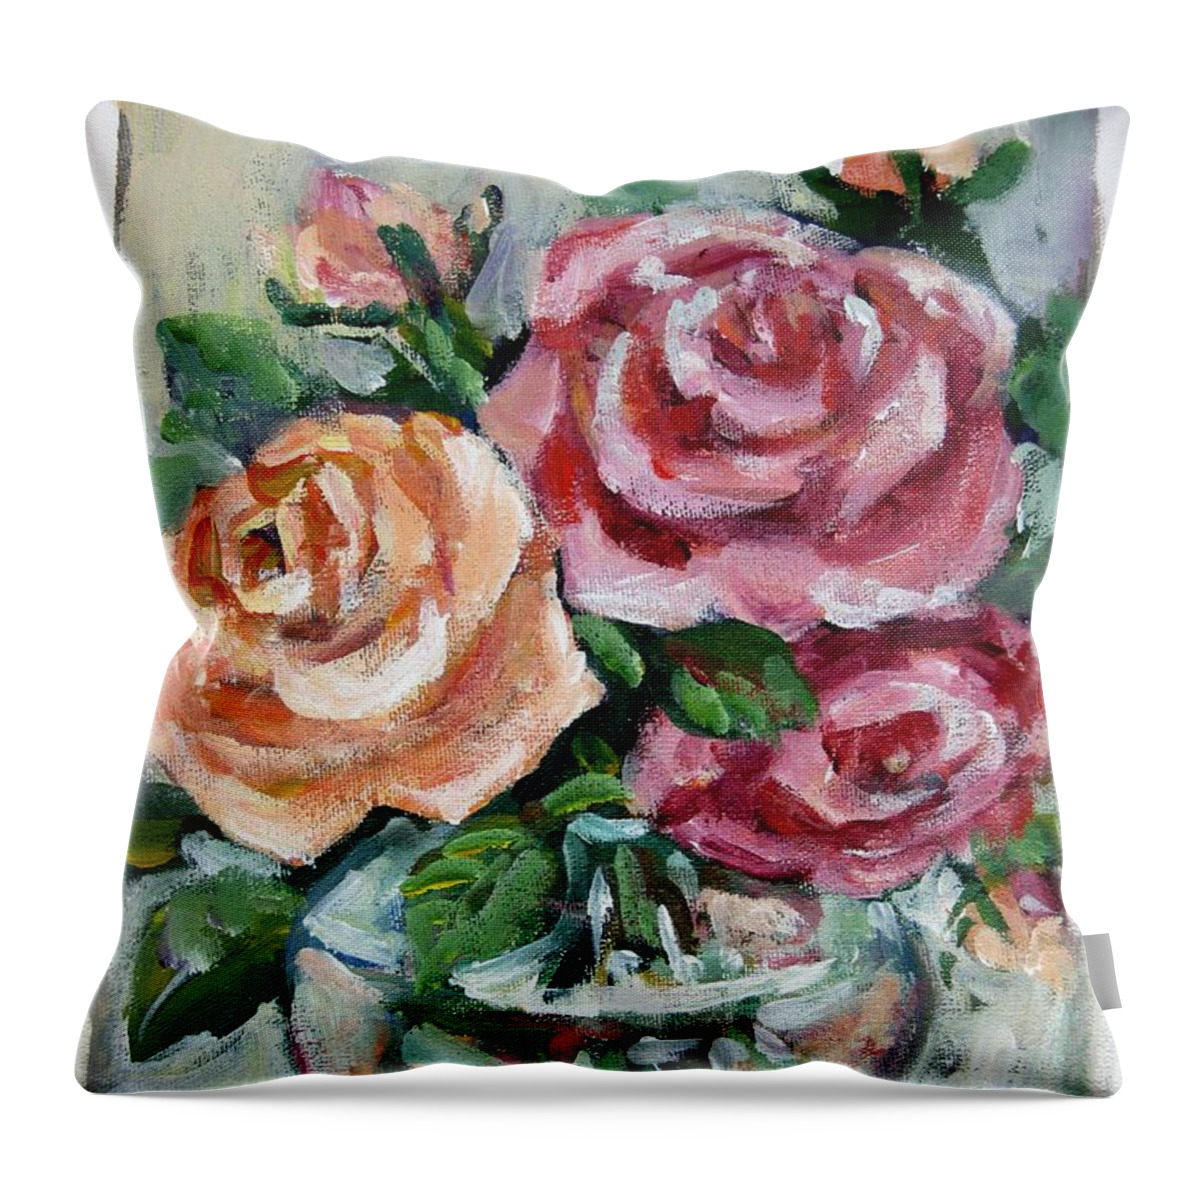 Flowers Throw Pillow featuring the painting Roses by Ingrid Dohm